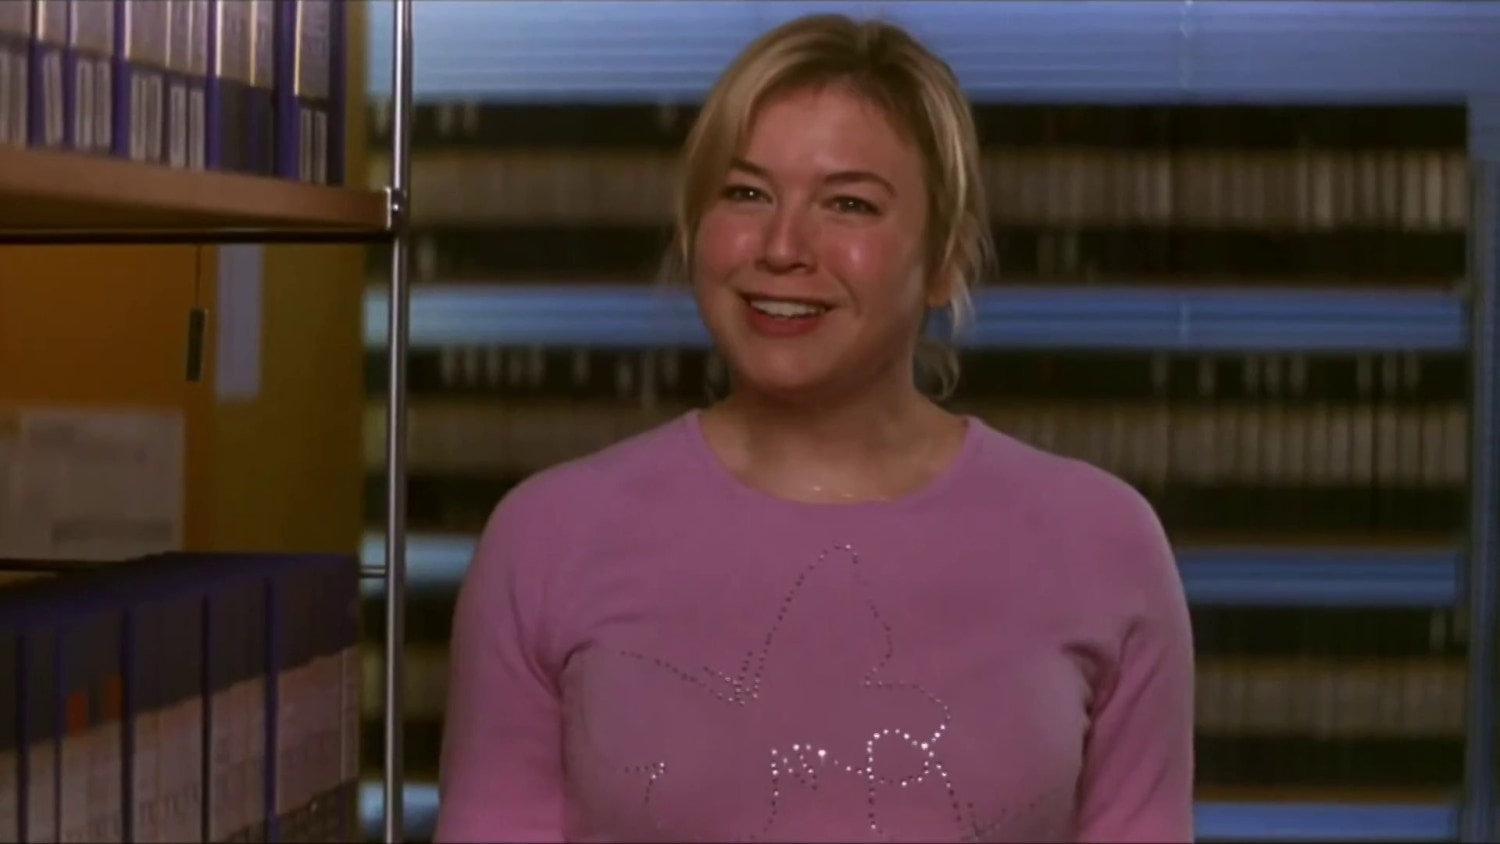 Bridget Jones 4 - Will there be another movie, and will Renee Zellweger and  the original cast return?